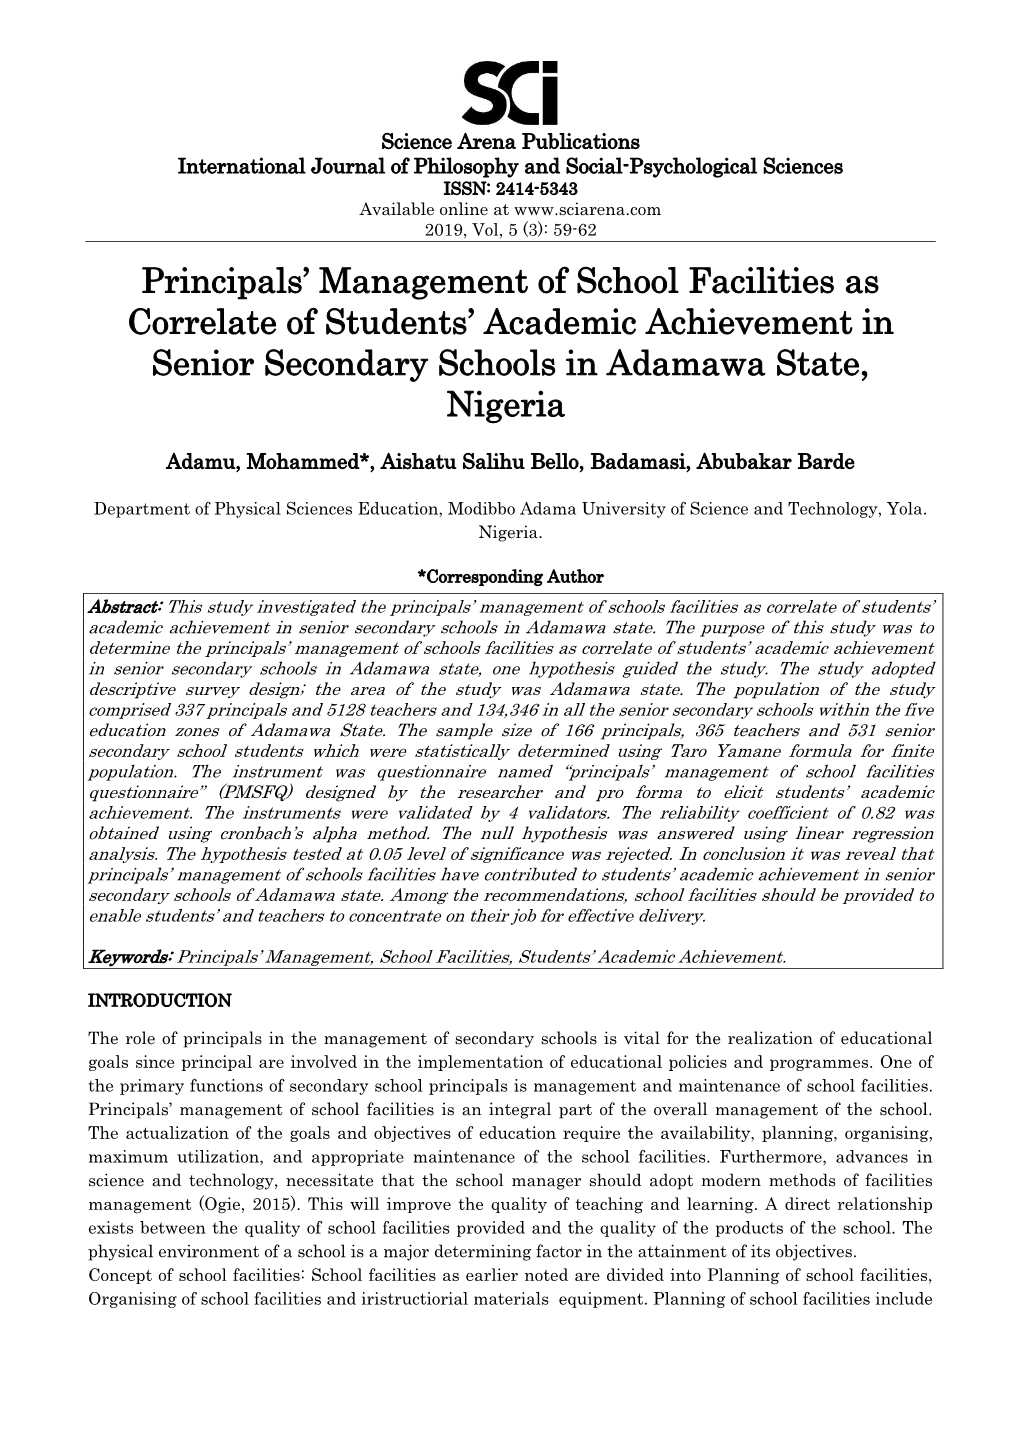 Principals' Management of School Facilities As Correlate of Students' Academic Achievement in Senior Secondary Schools in Ad